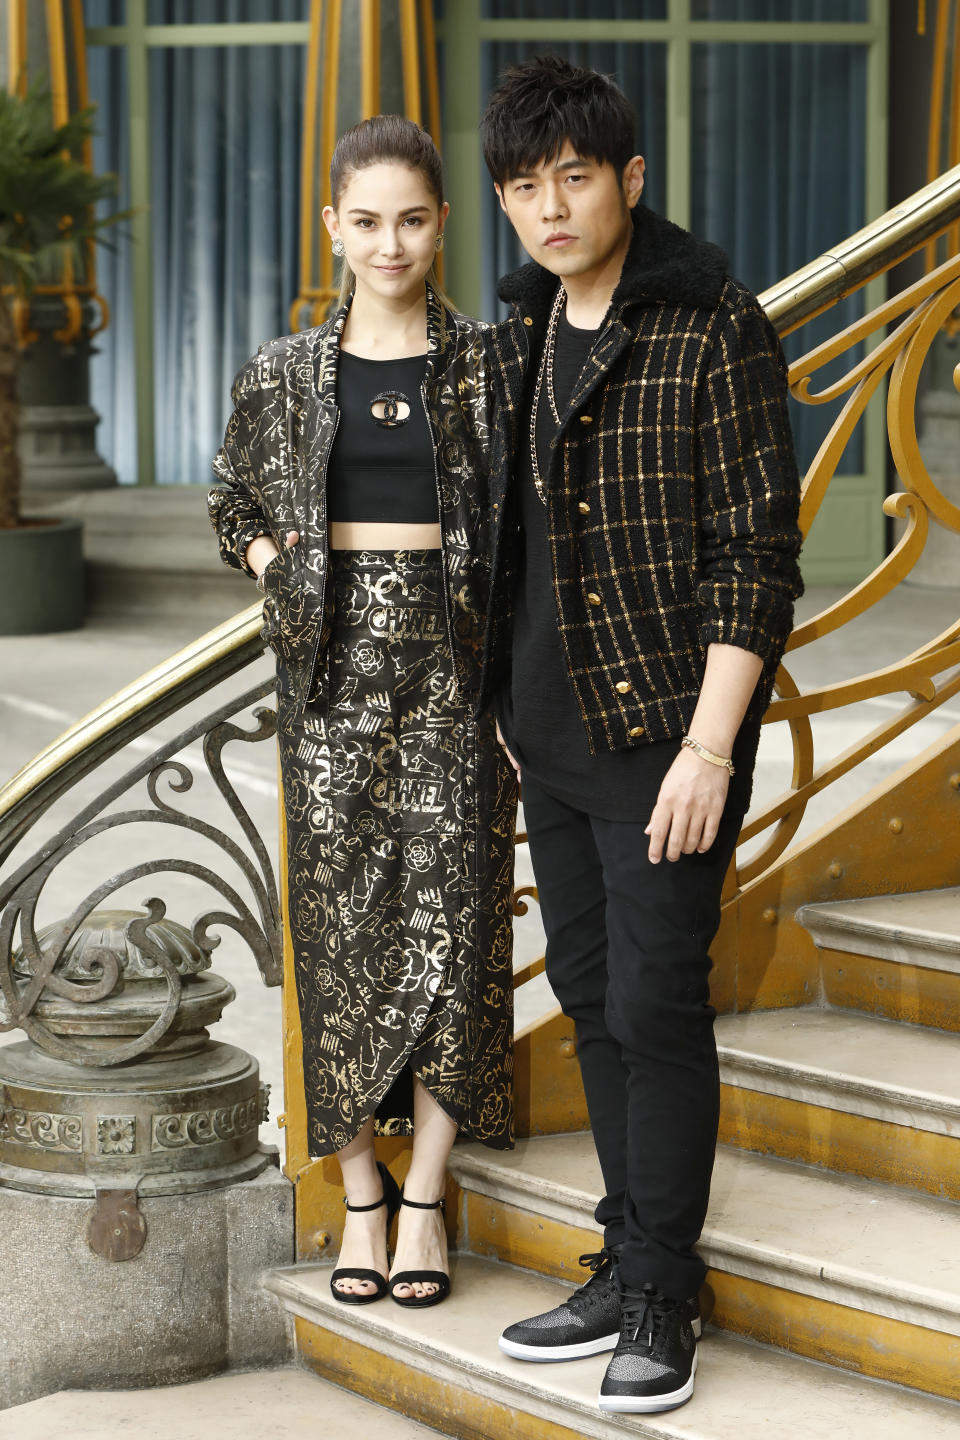 Hannah Quinlivan and Jay Chou attend the Chanel Cruise 2020 collection. - Credit: Getty Images for Chanel